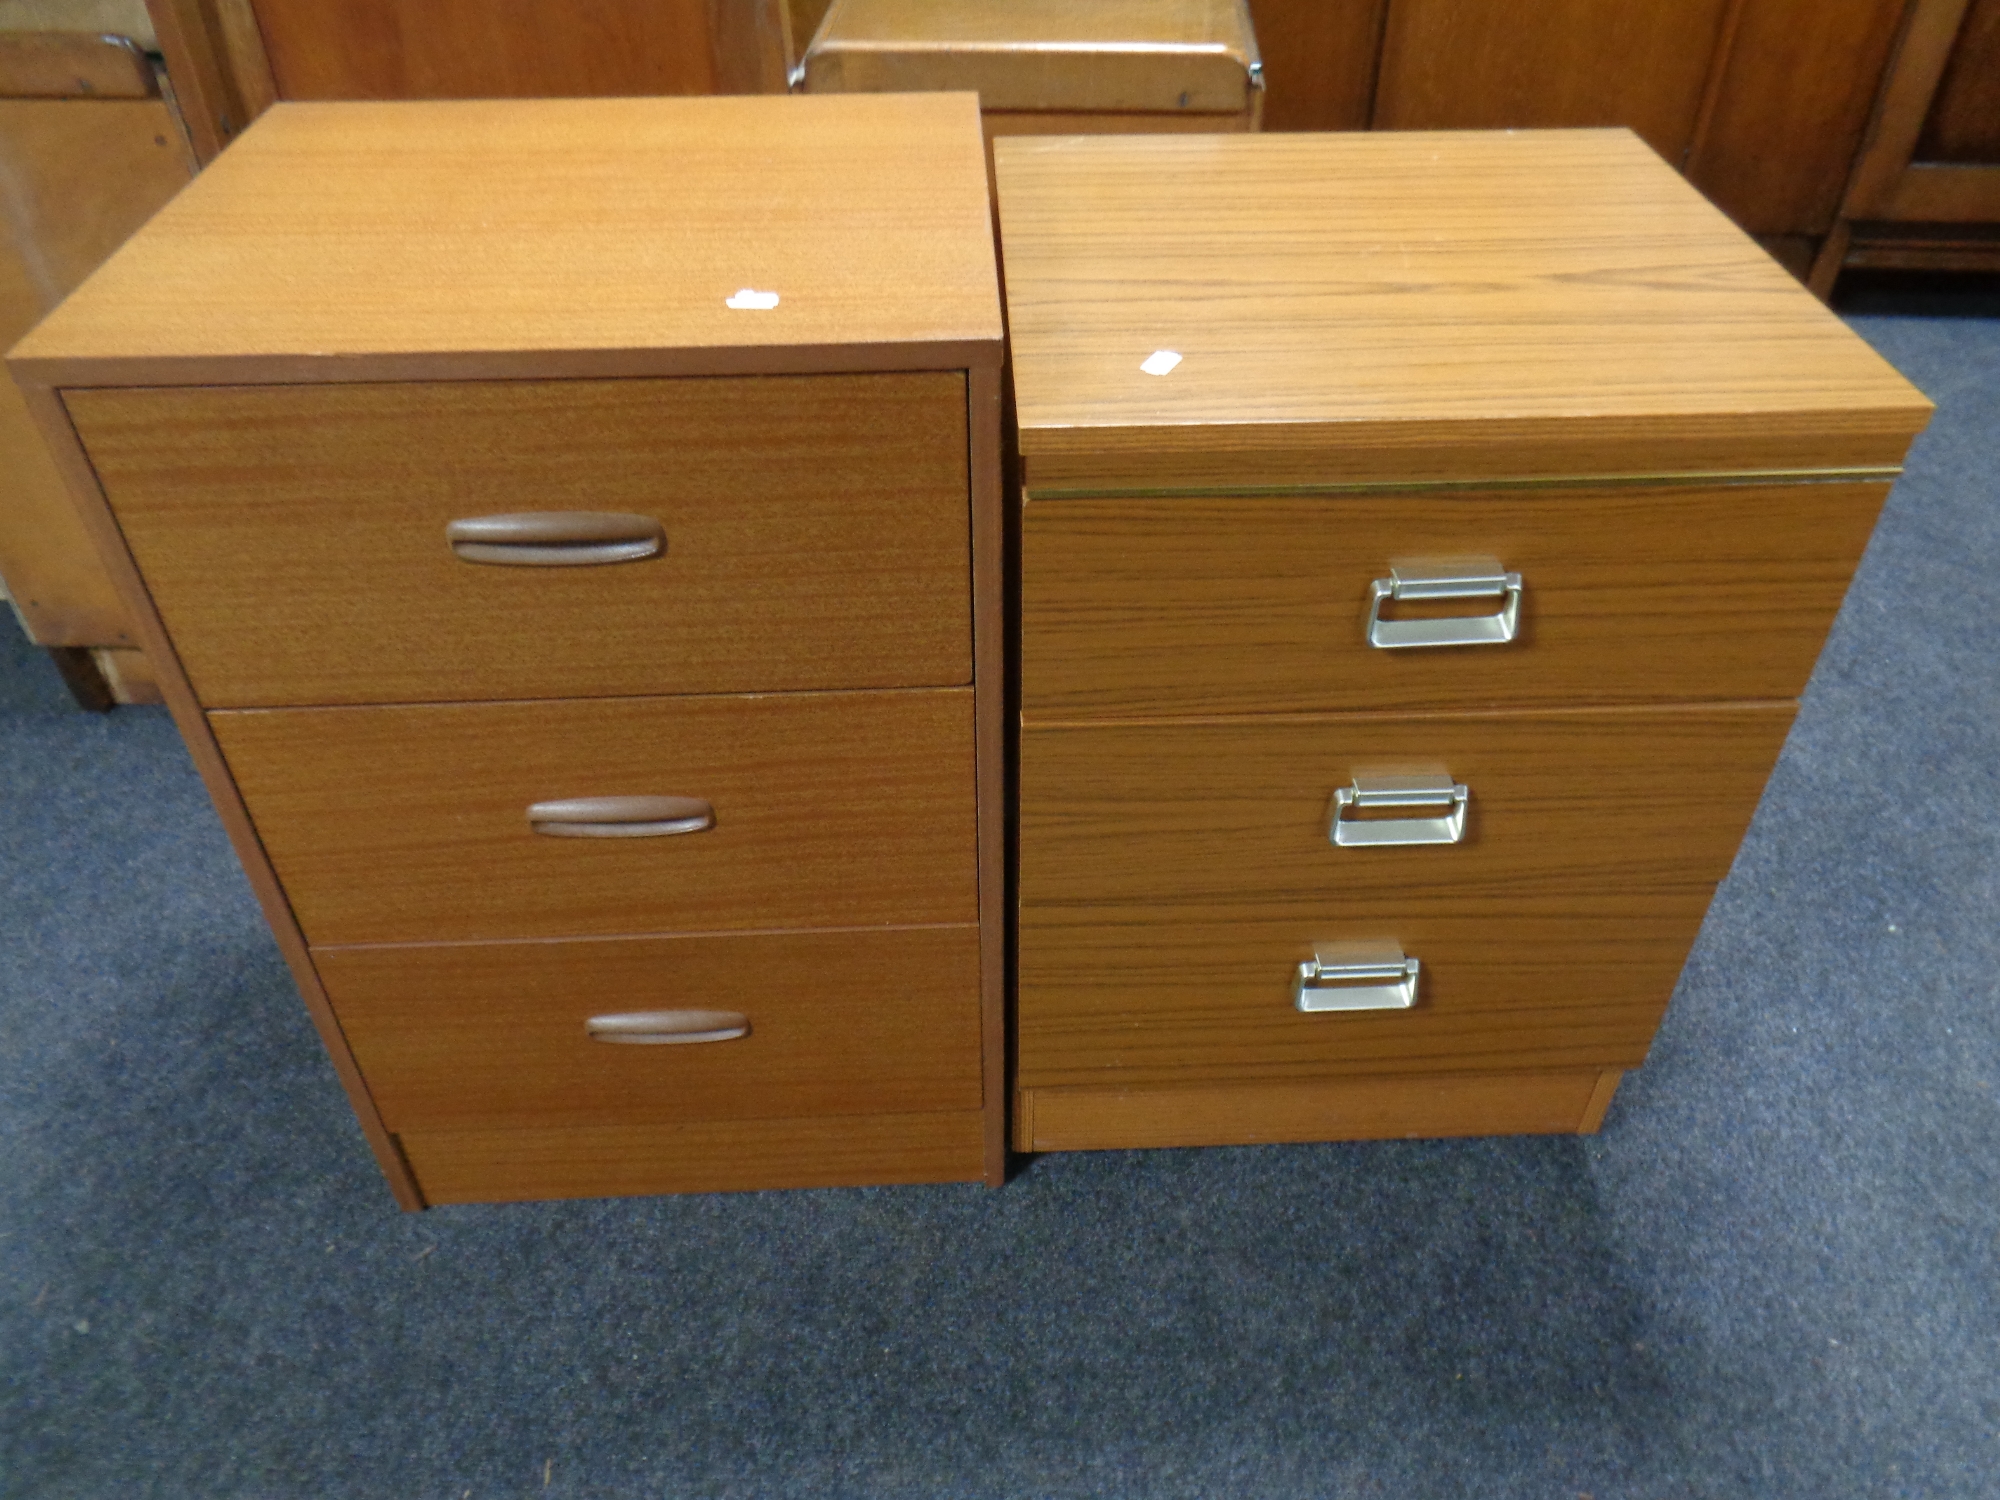 Two teak effect three drawer bedside chests